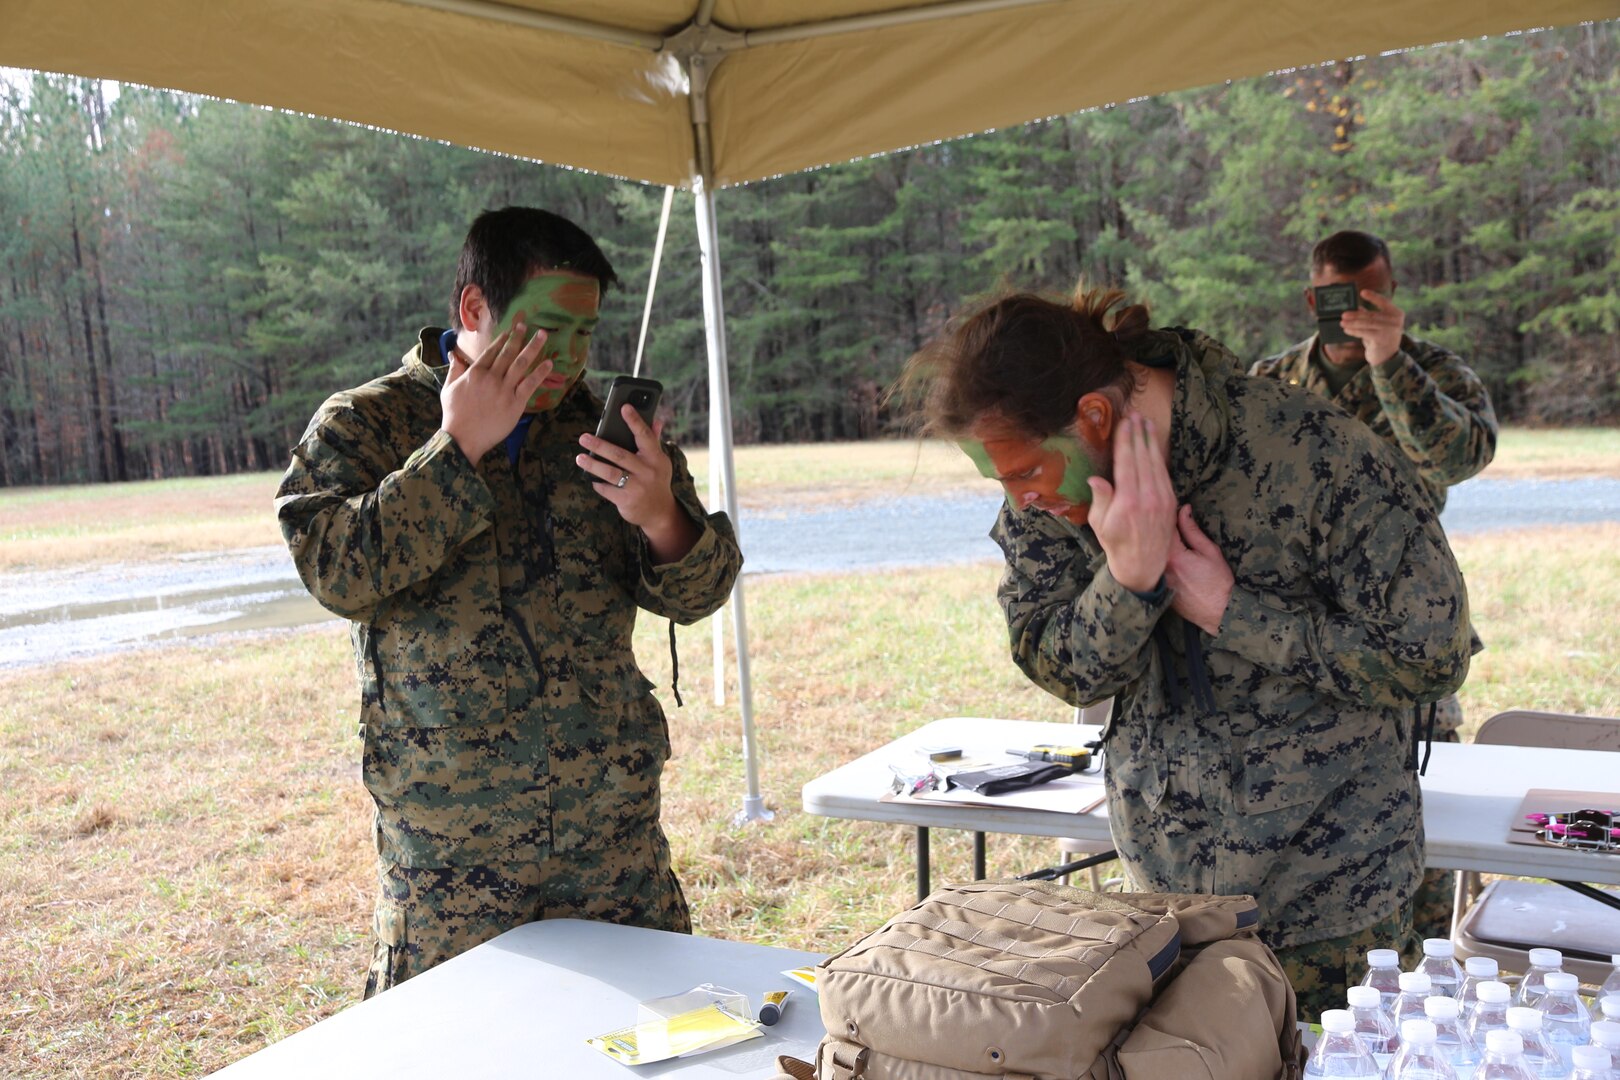 Infantry Equipping Challenge drives toward leaner, more lethal gear for